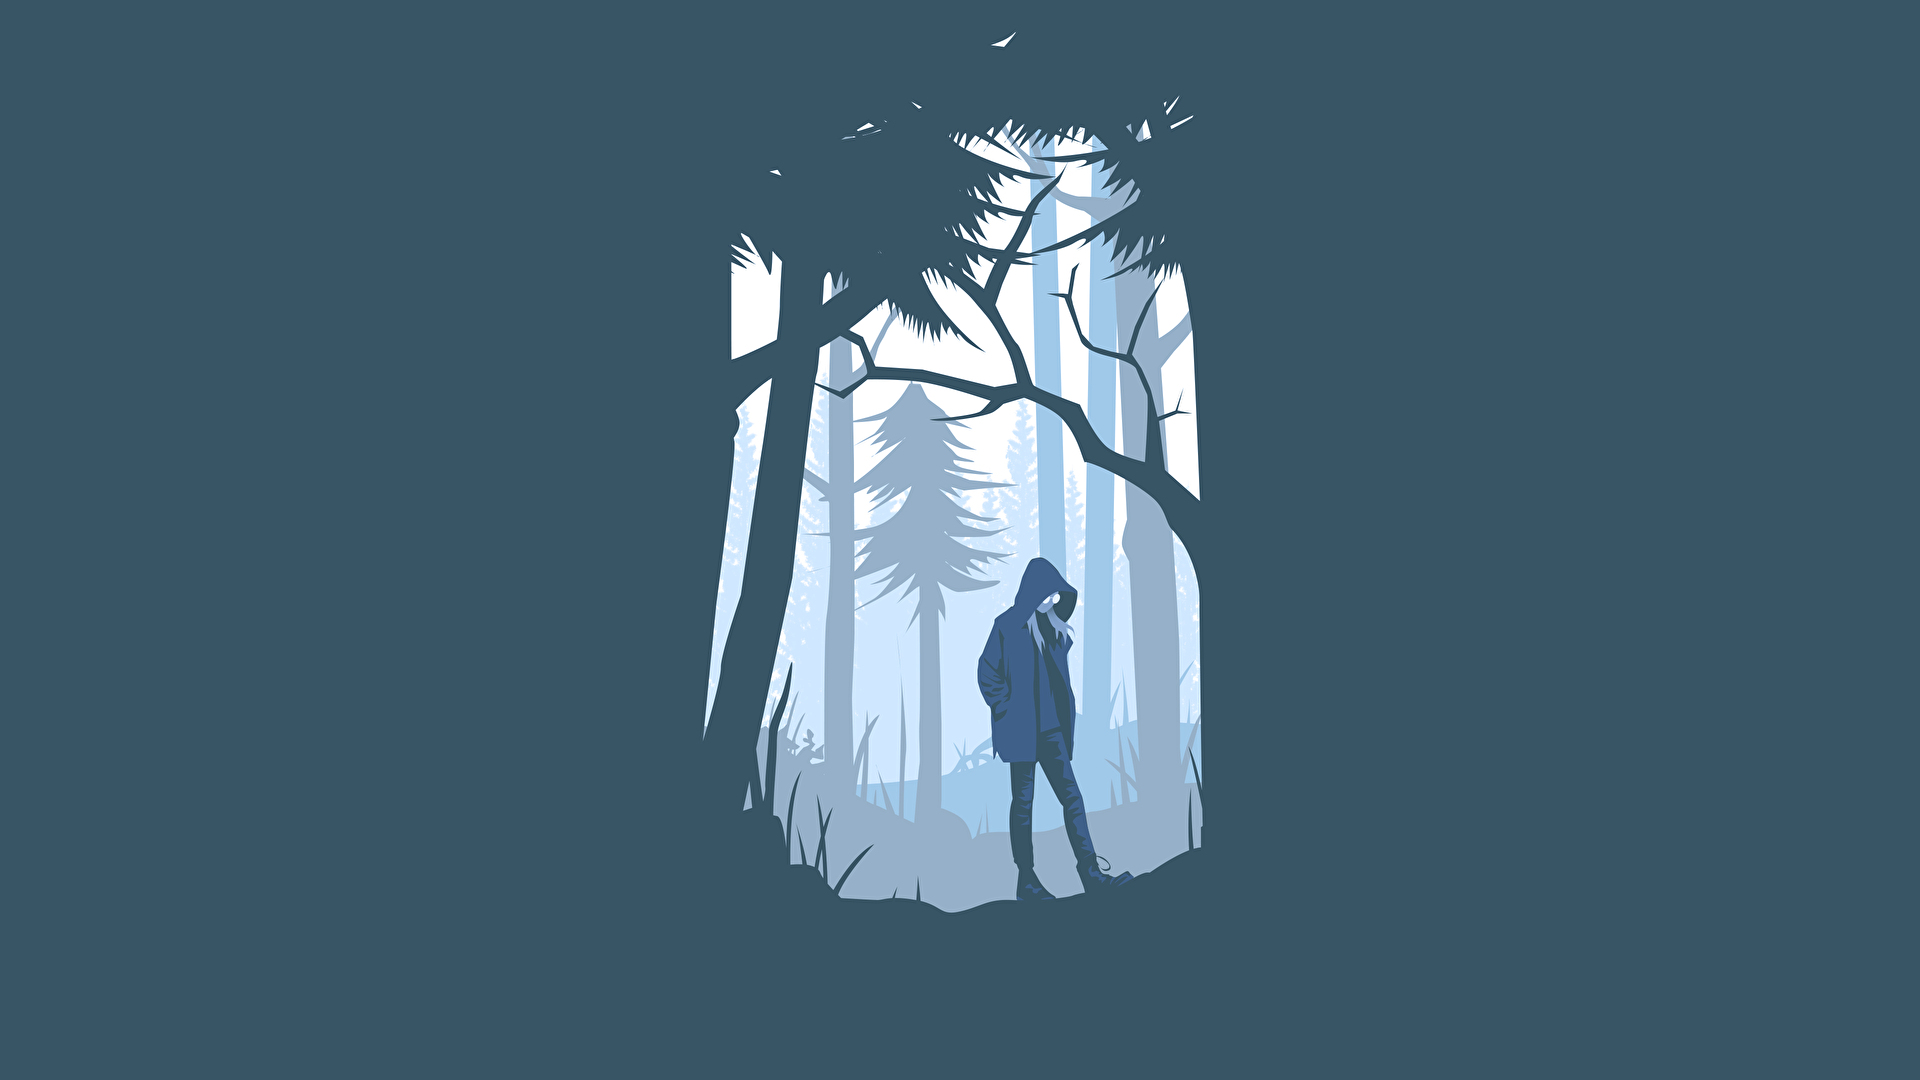 General 1920x1080 simple background minimalism forest